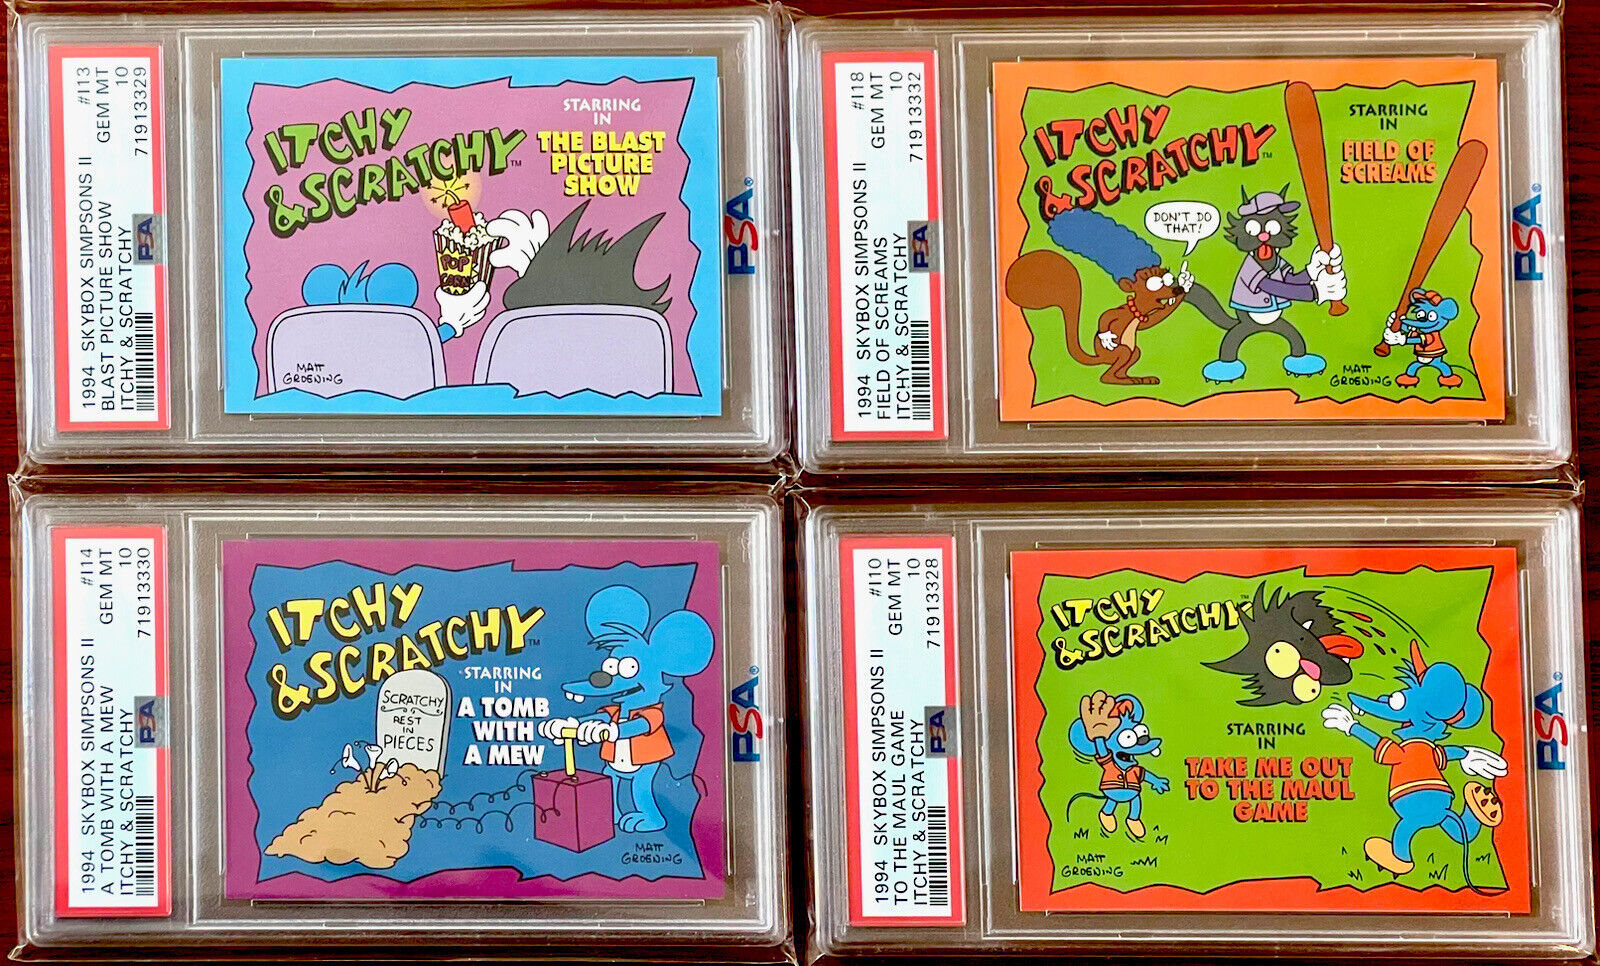 SSP POP 1 PSA 10 Itchy & Scratchy 1994 Skybox The Simpsons Horizontal Lot of (4)